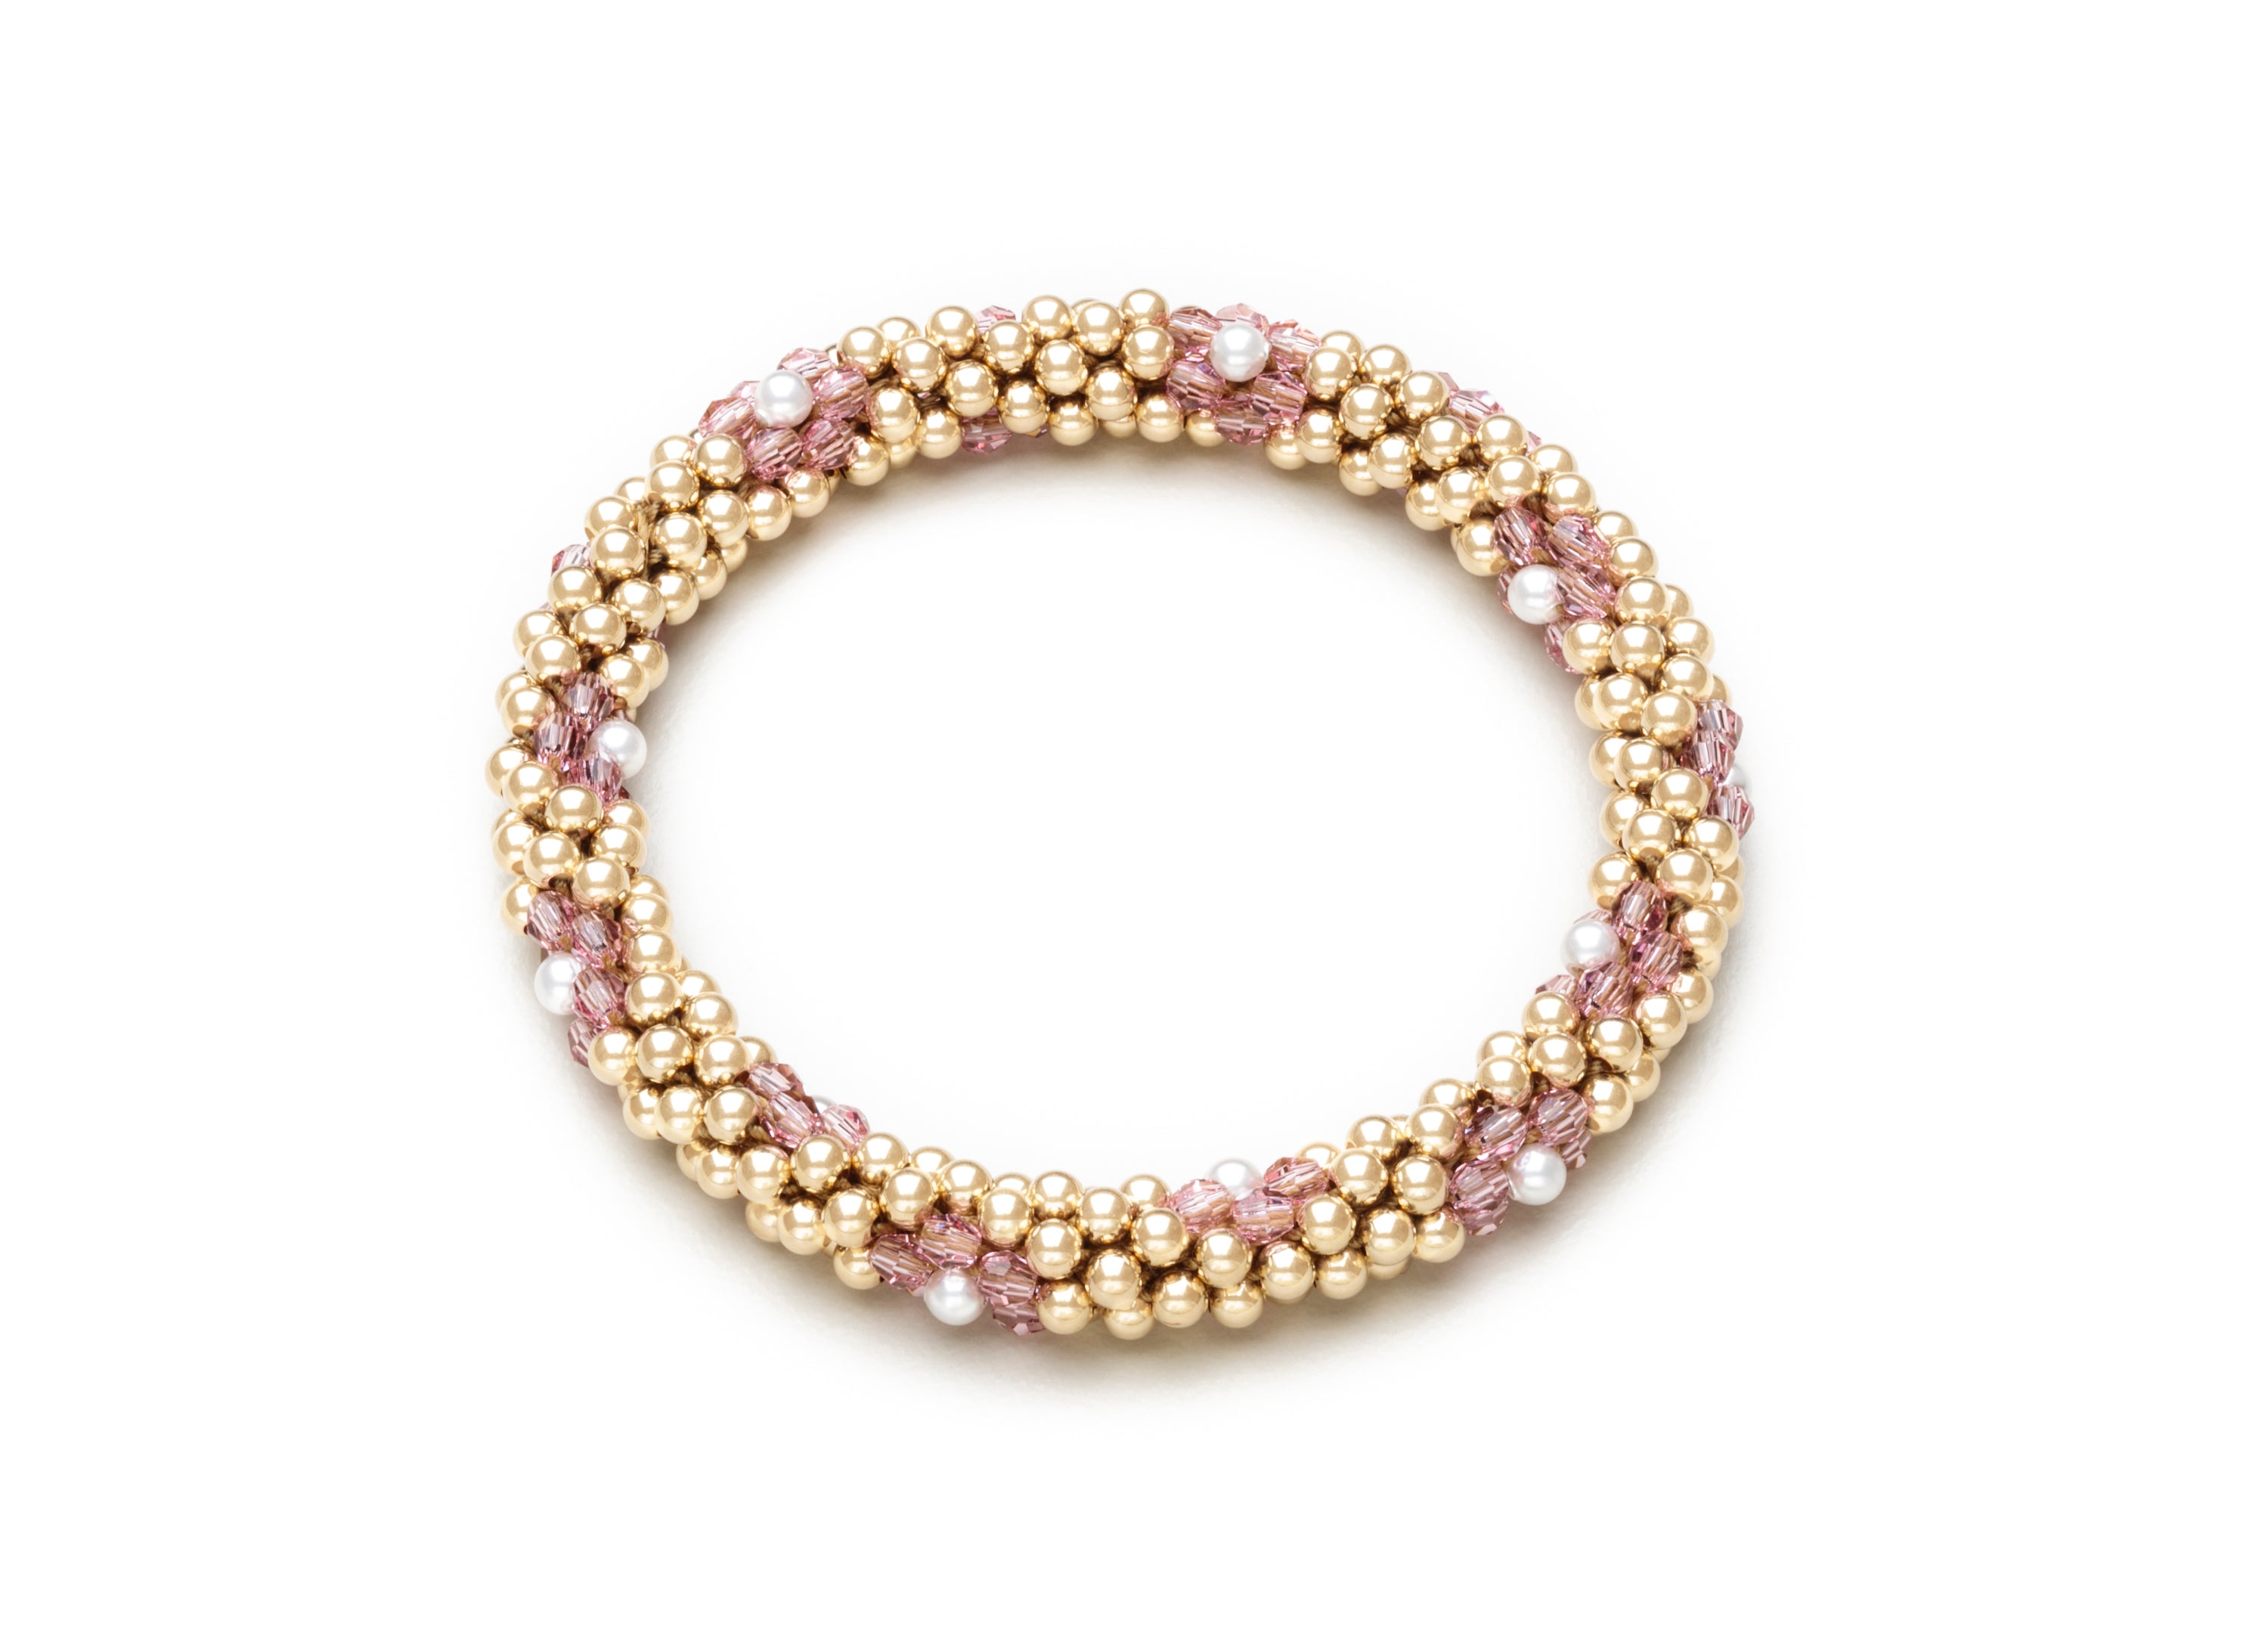 3mm Cluster Bracelets, Gold and Silver Floret Design (Click to View All)